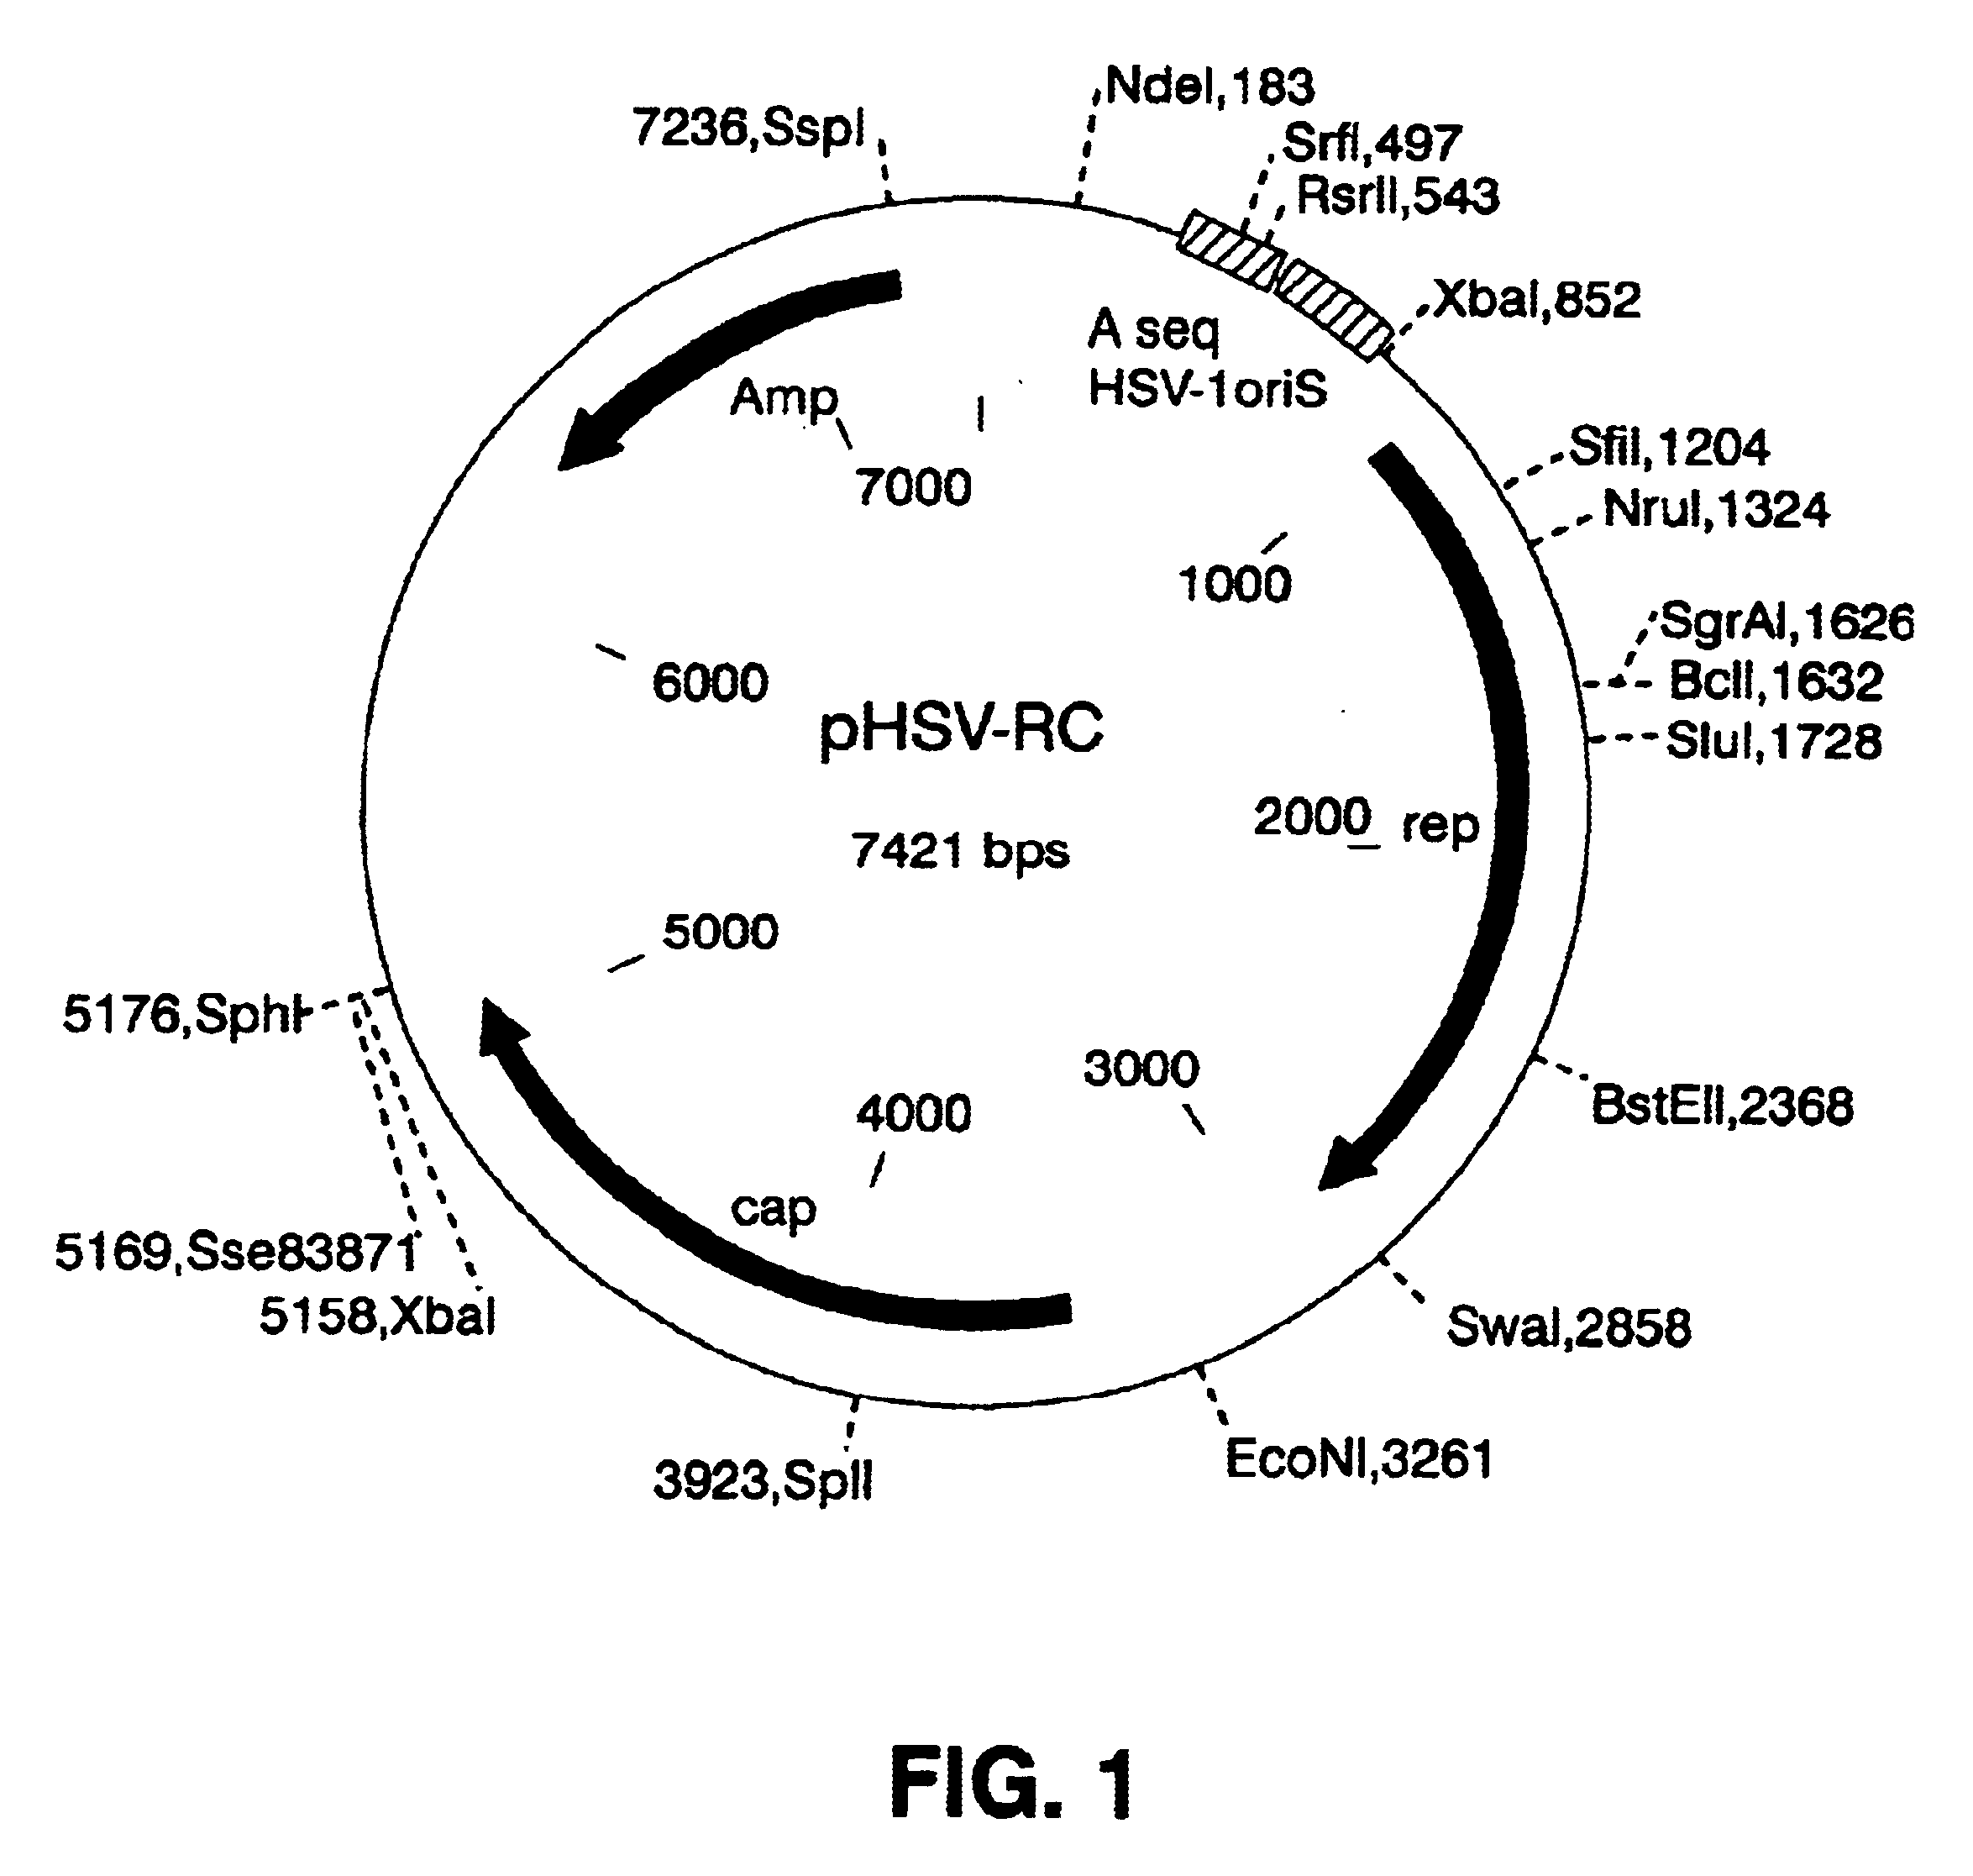 Methods for large-scale production of recombinant AAV vectors